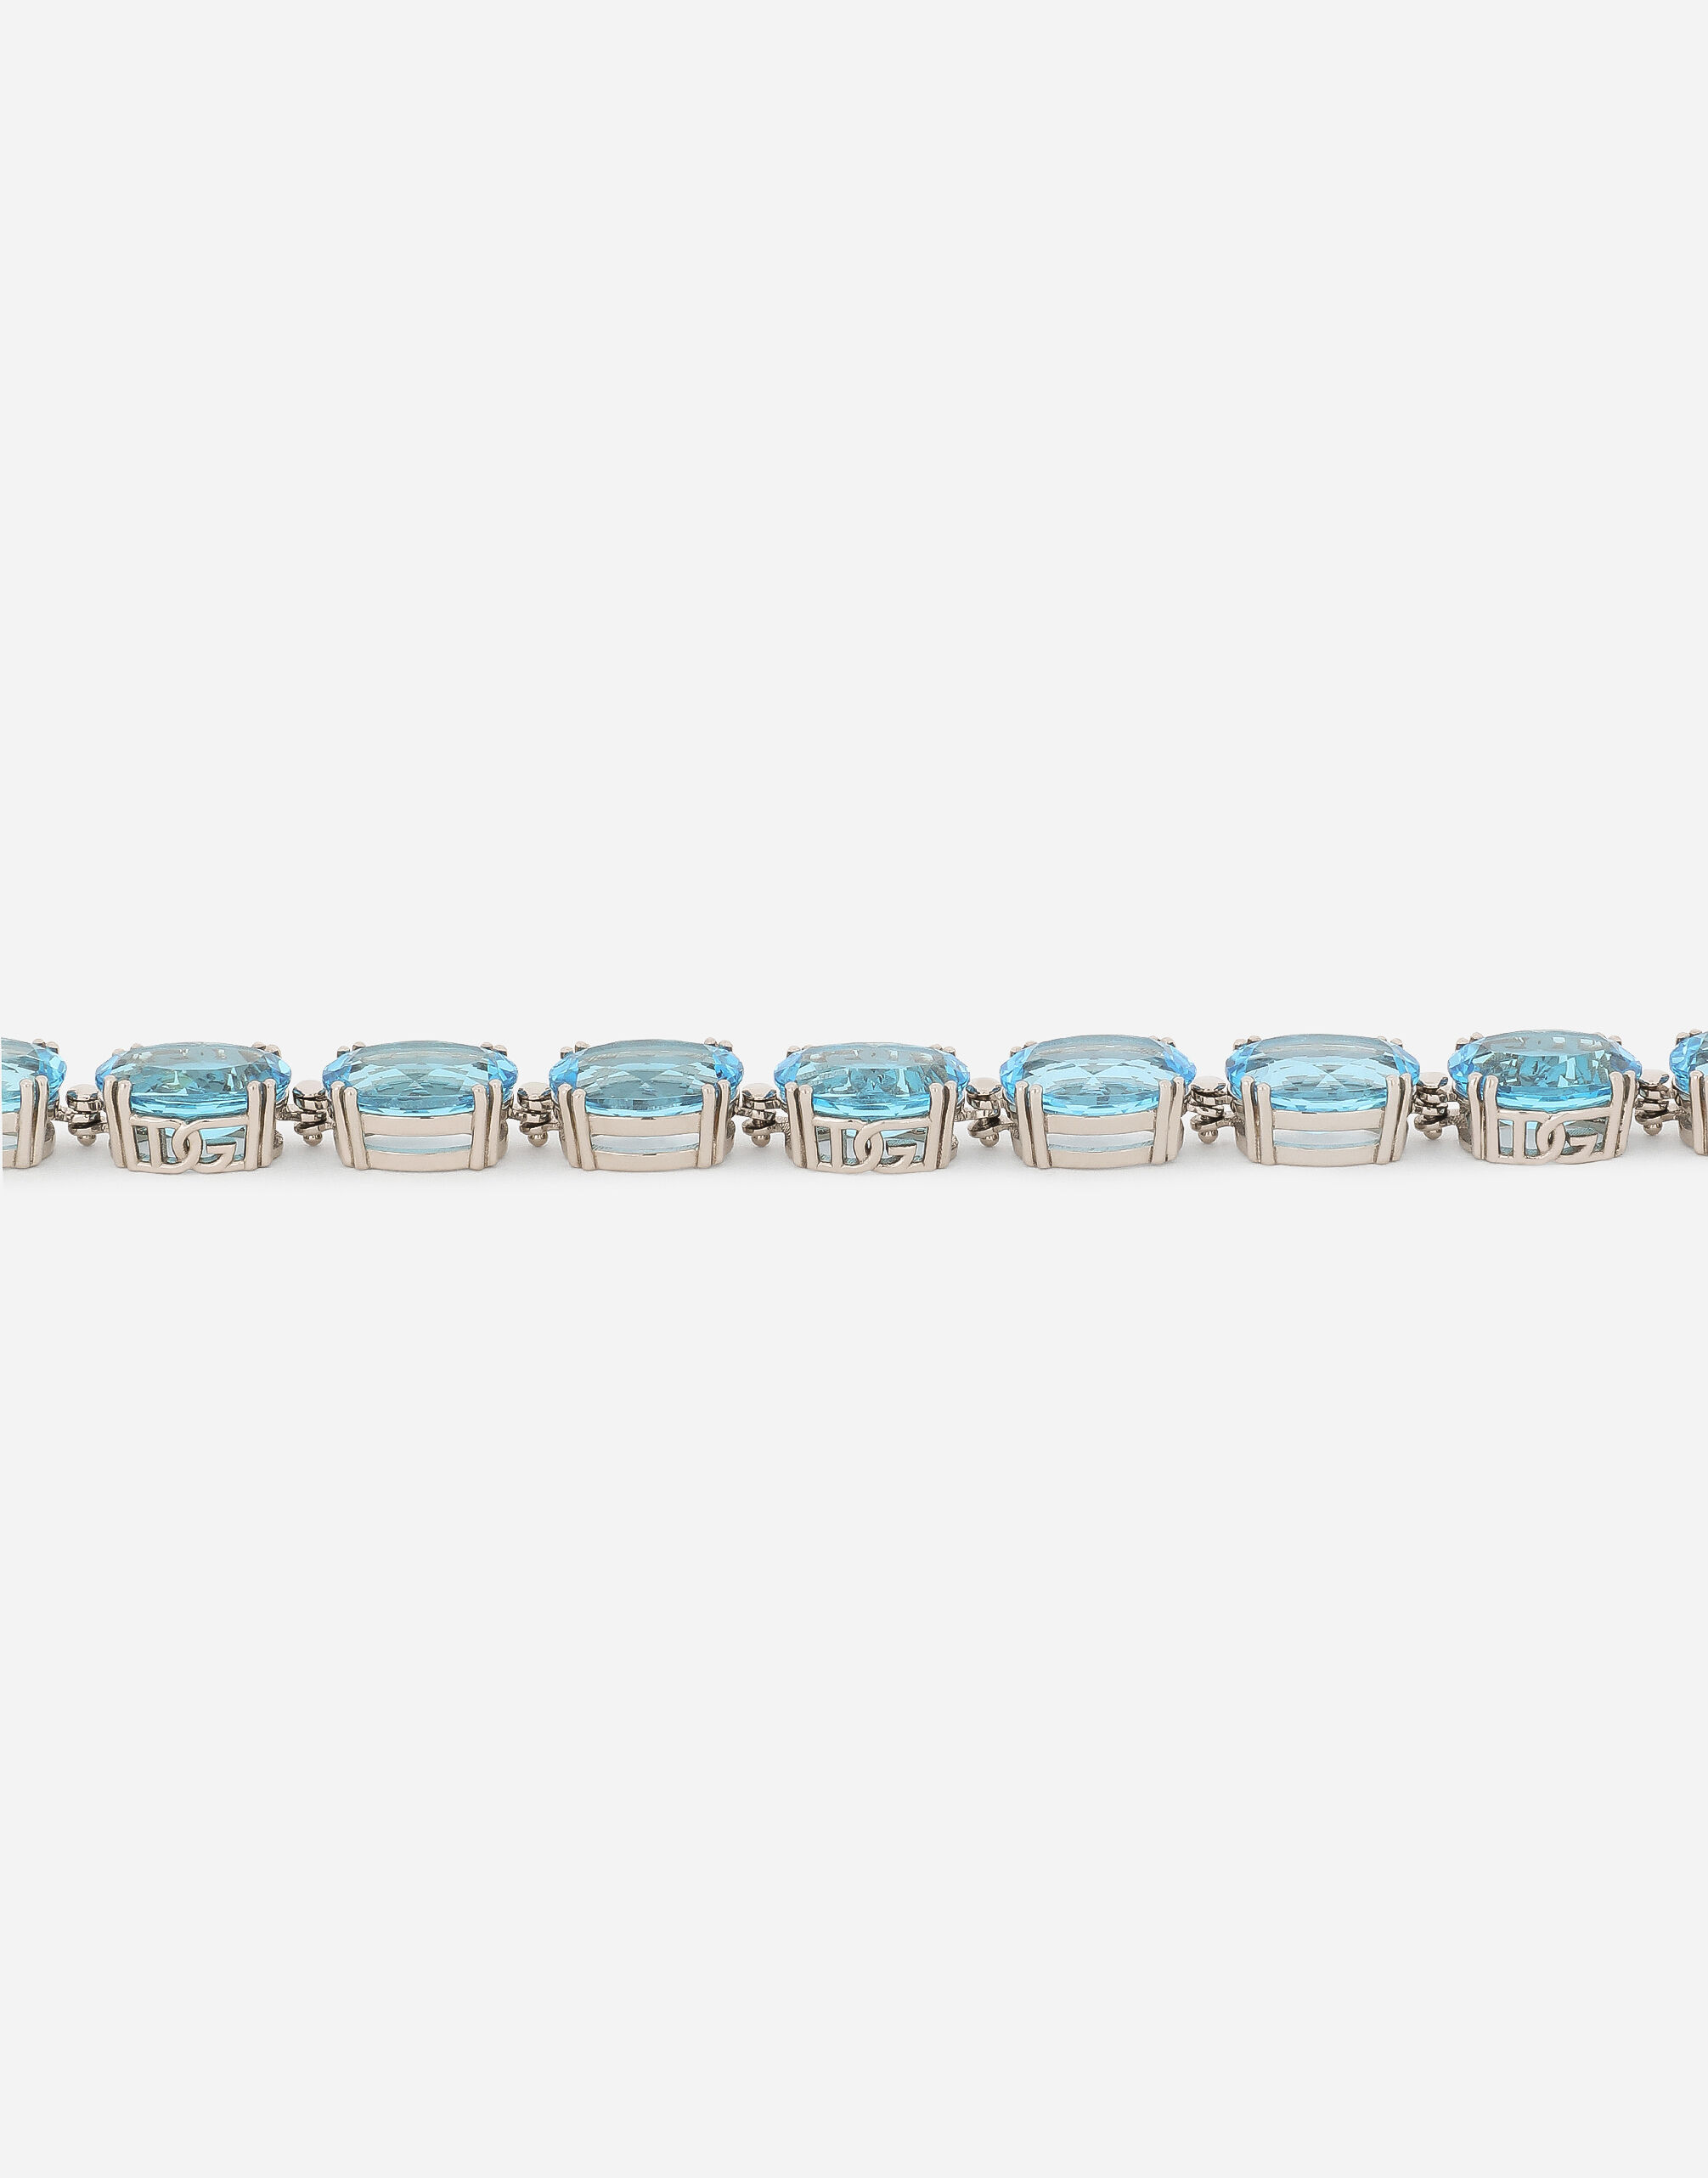 Anna necklace in white gold 18kt with light blue topazes